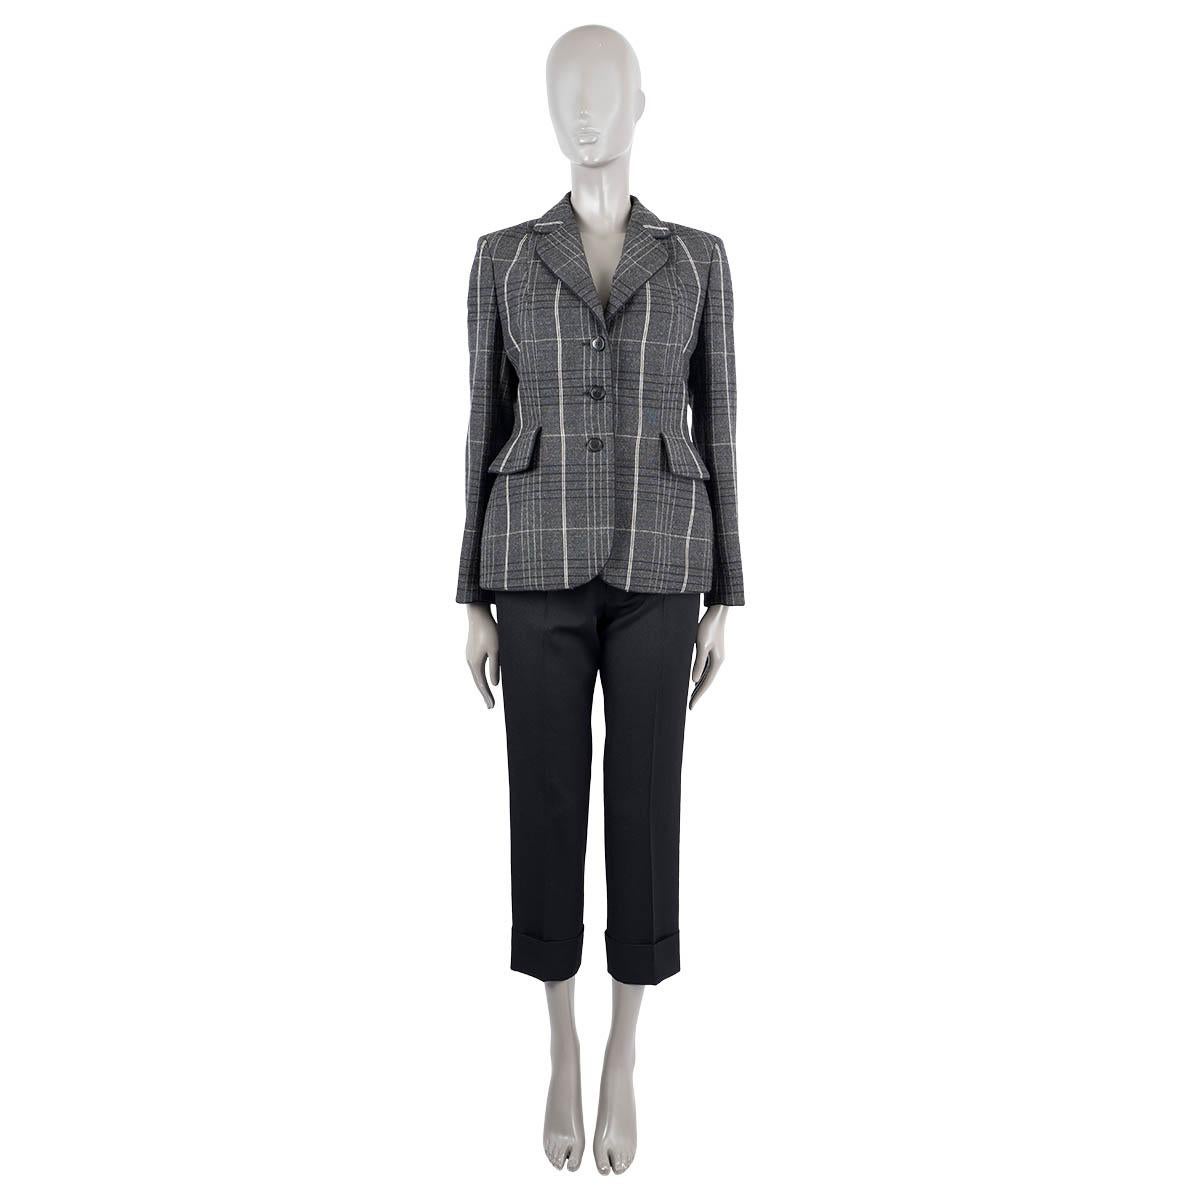 100% authentic Christian Dior blazer in grey wool (100%) with ivory and black plaid print. Features a peak collar and two flap pockets on the front. Closes with buttons on the front and is lined in silk (100%). Brand new with tags.

2018